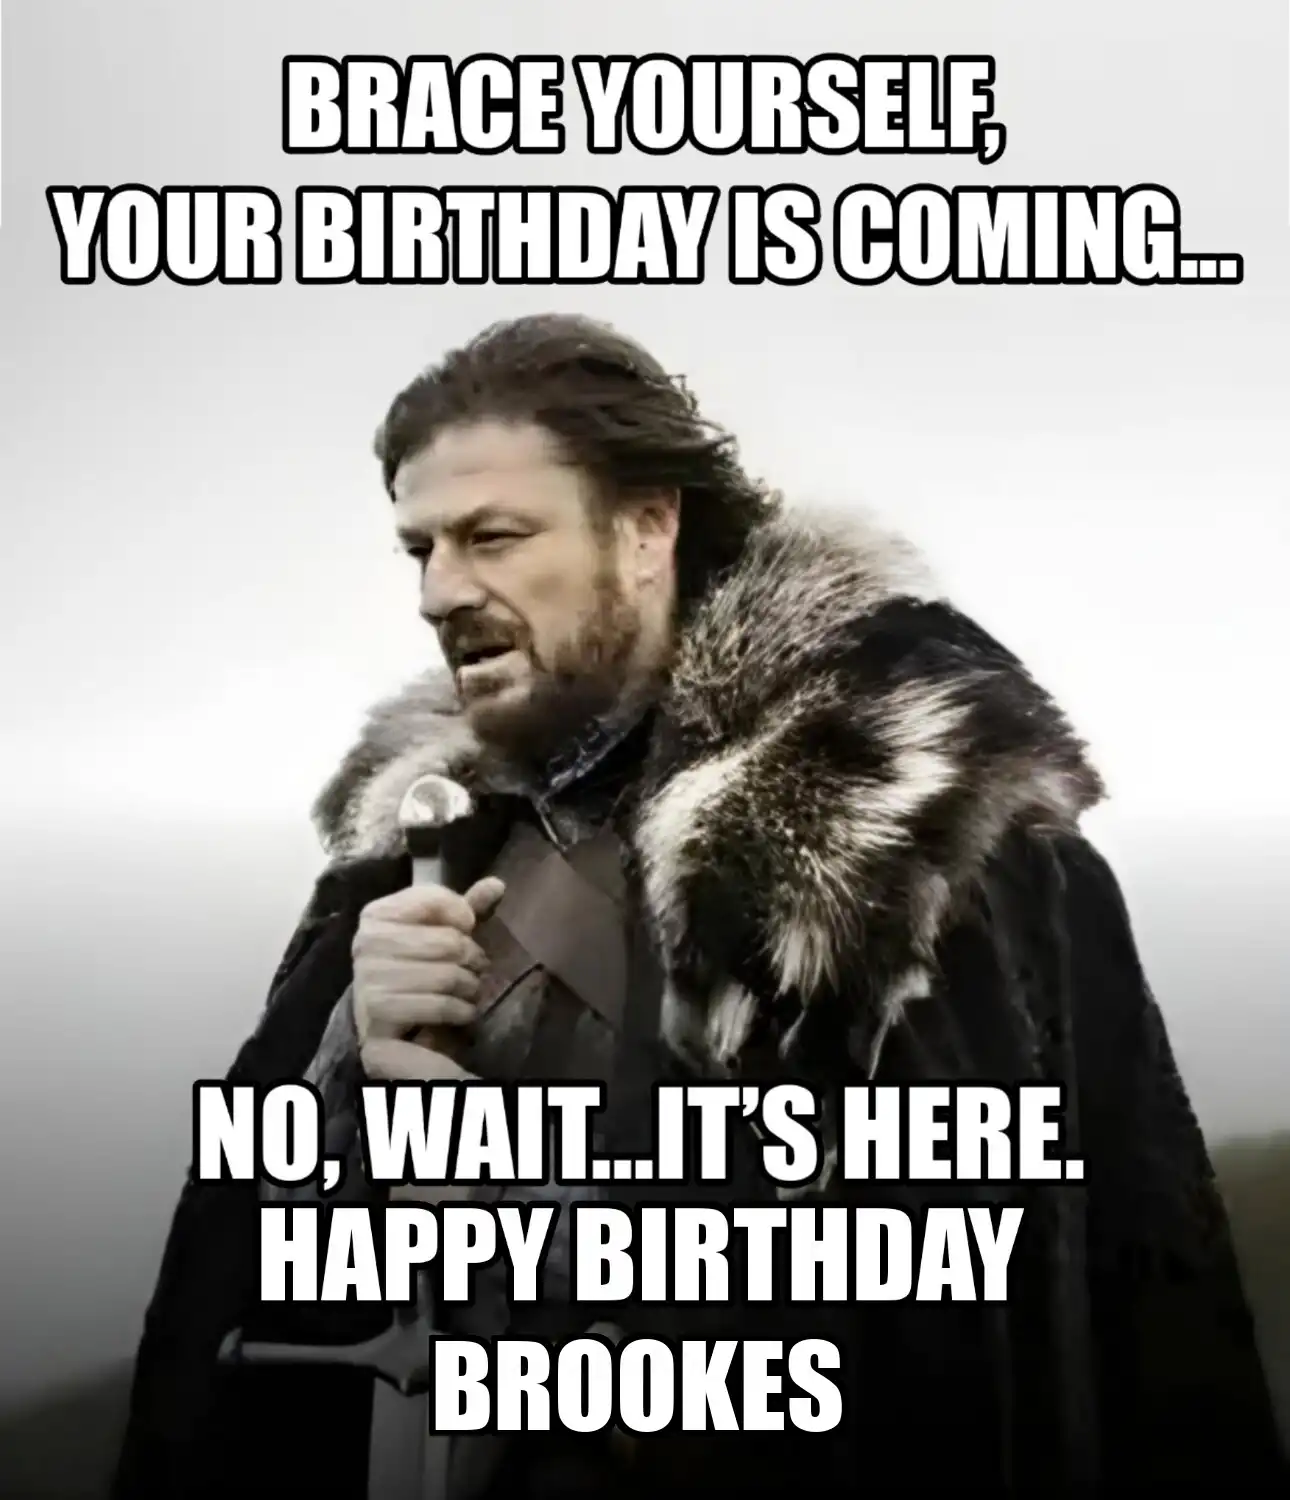 Happy Birthday Brookes Brace Yourself Your Birthday Is Coming Meme